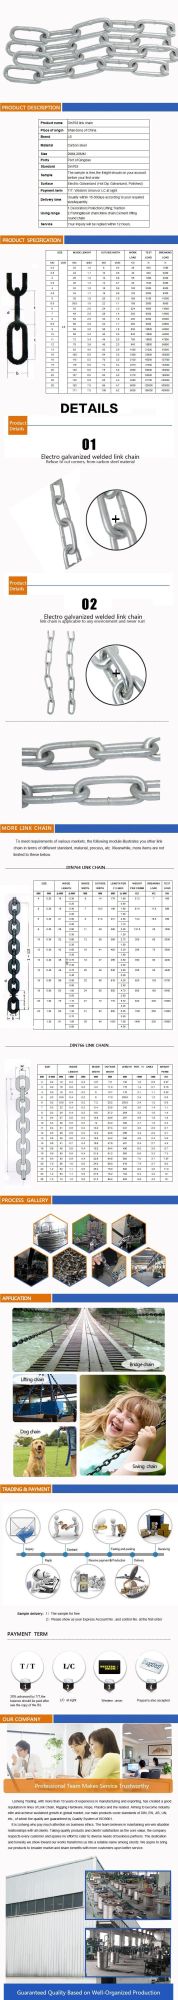 Stainless Steel Long Link Chain DIN763 Standard